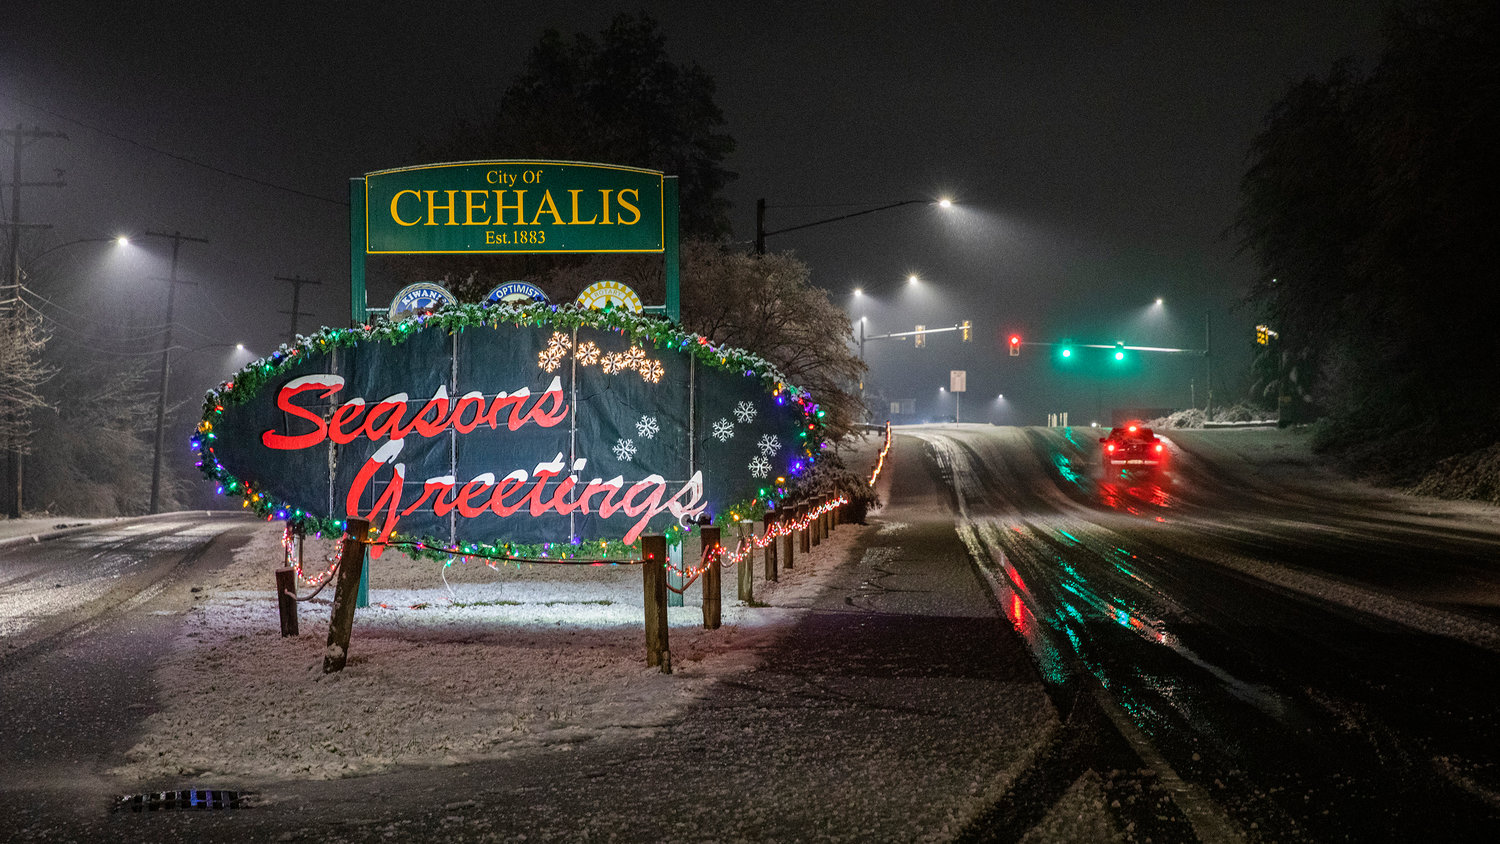 Snow falls as the “Seasons Greetings” sign in Chehalis is illuminated Sunday night.